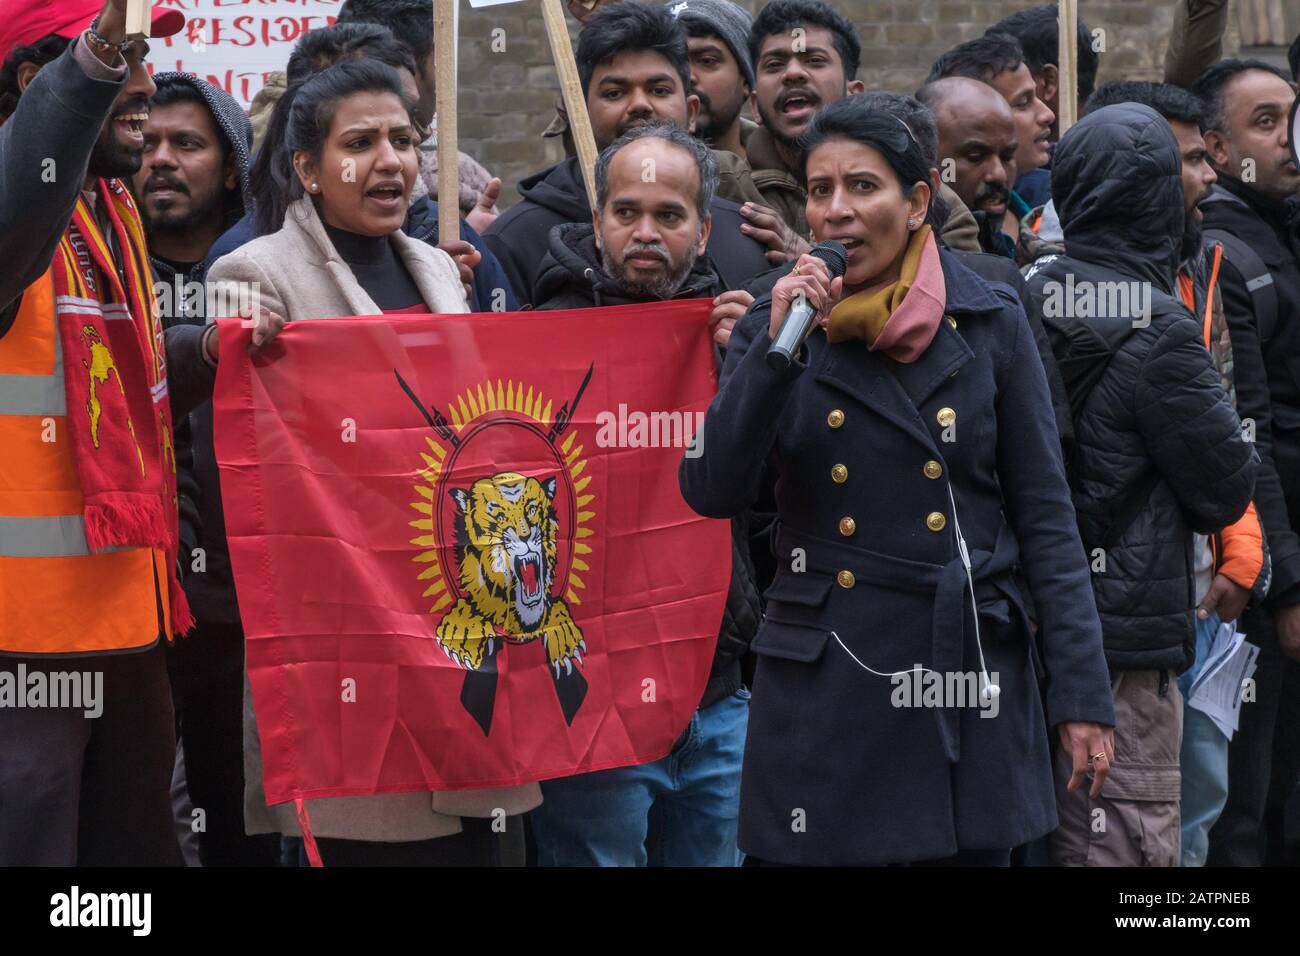 London, UK. 4th February 2020. people hold Tamil Eelam flag. Tamils protest at the Sri Lankan High Commission on Independence Day against the continued denial of the democratic and national rights of Tamils. Sri Lanka now admits the 20,000 Tamils 'disappeared' by the authorities in 2009 are dead and Tamils demand justice and information about their deaths. Credit: Peter Marshall/Alamy Live News Stock Photo